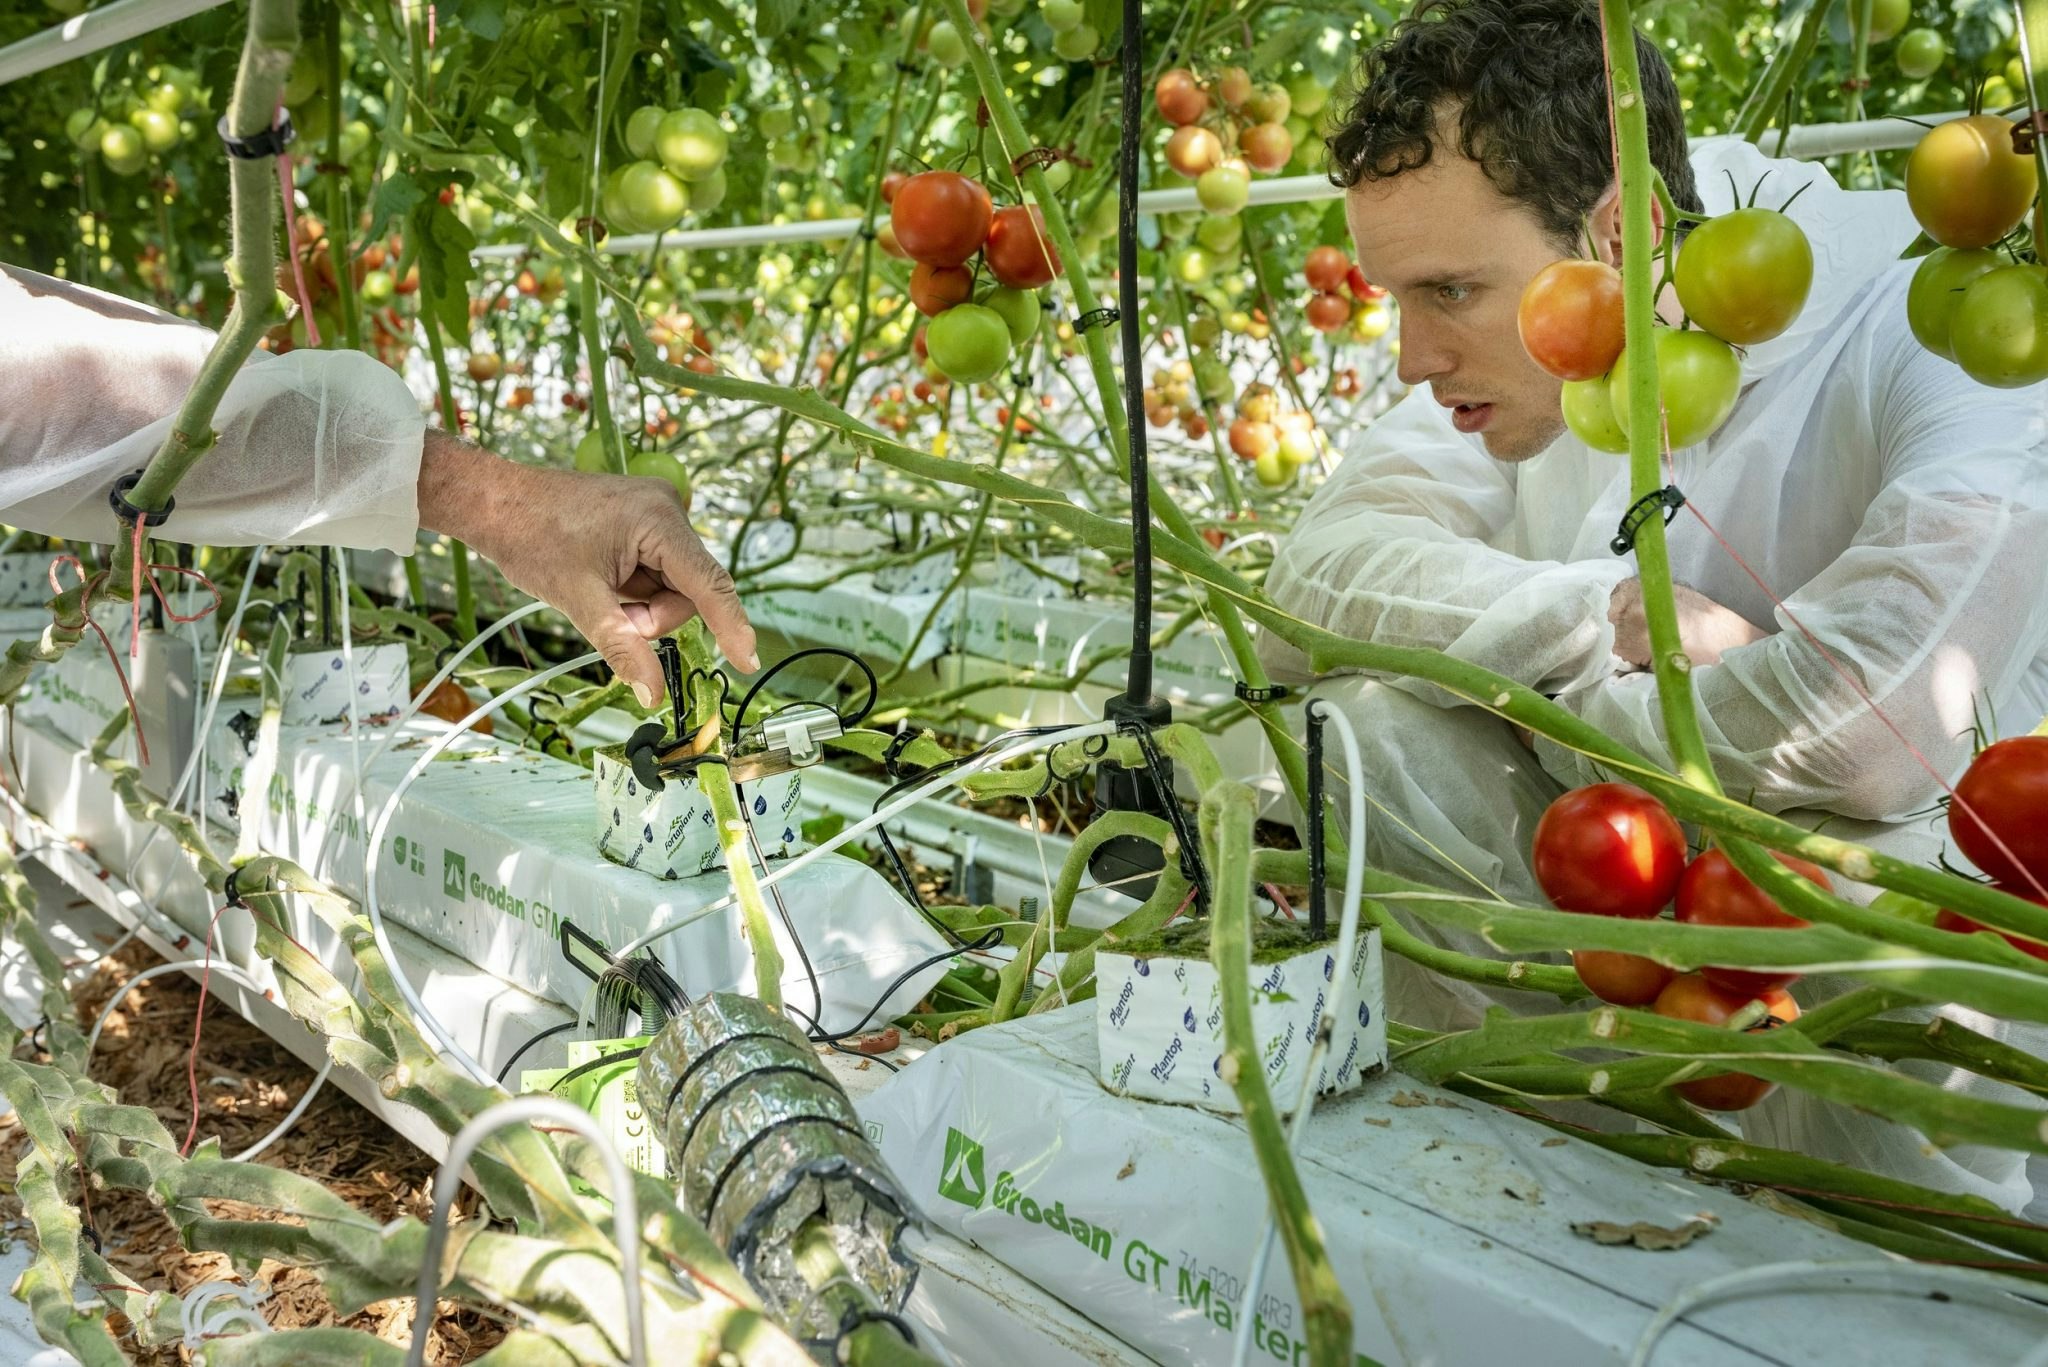 An image of a man in a tomato-growing greenhouse looking at a sensor attached to a plant